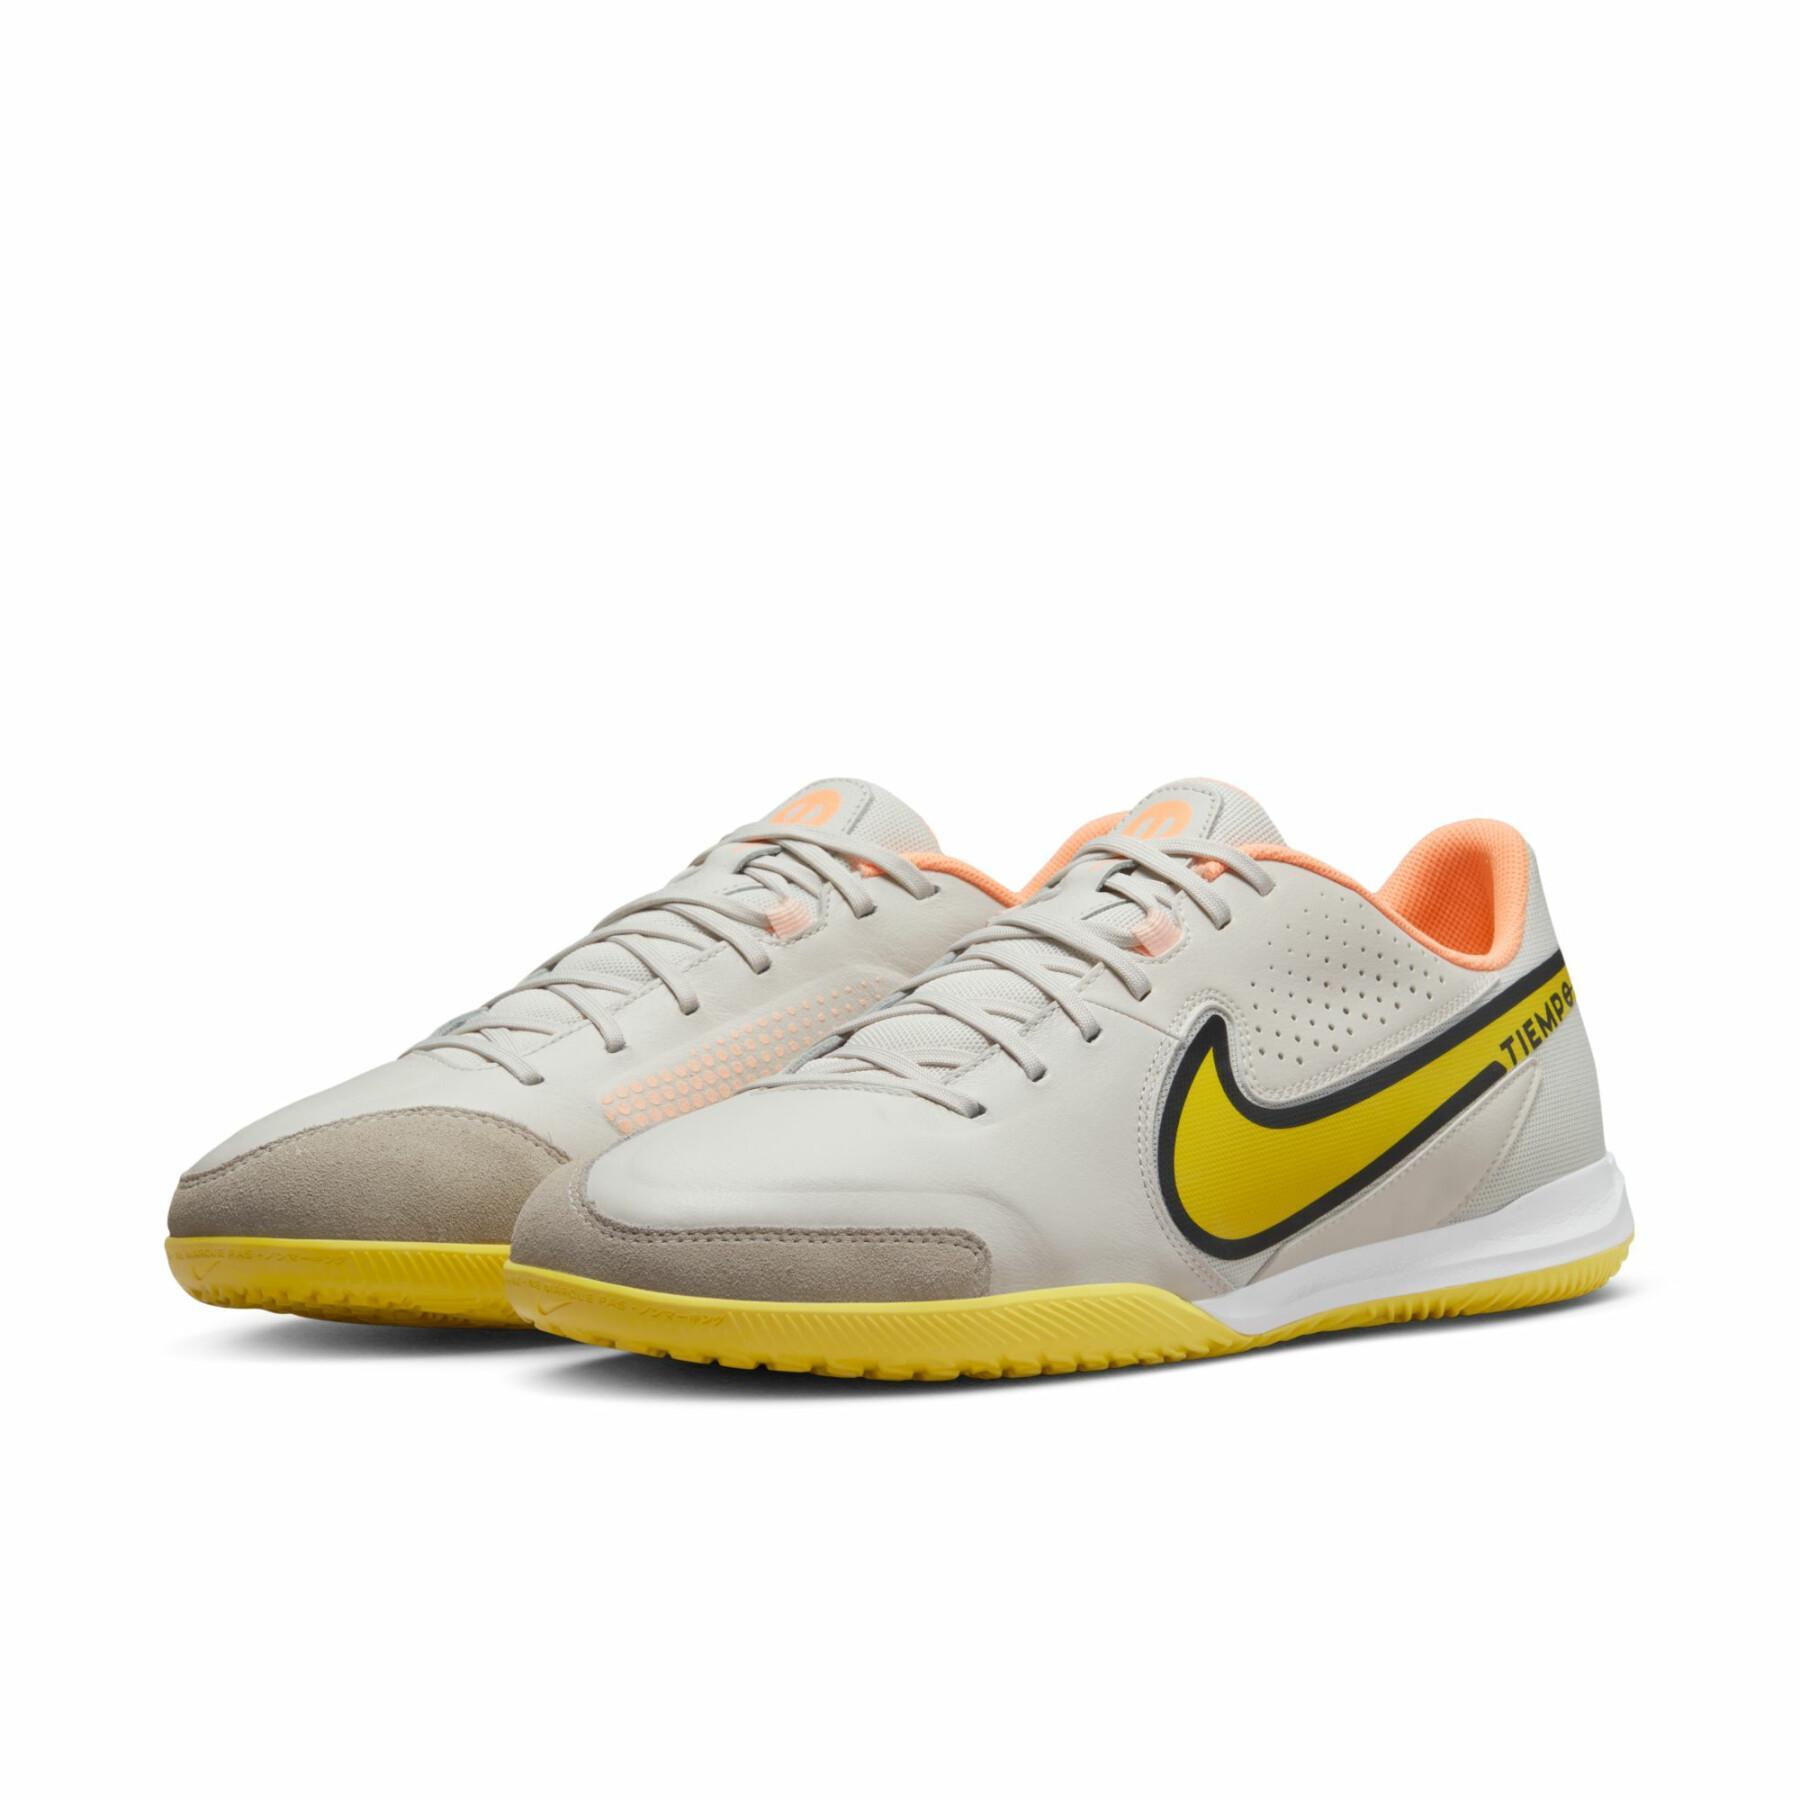 Chaussures de football Nike Tiempo Legend 9 Academy IC - Lucent Pack